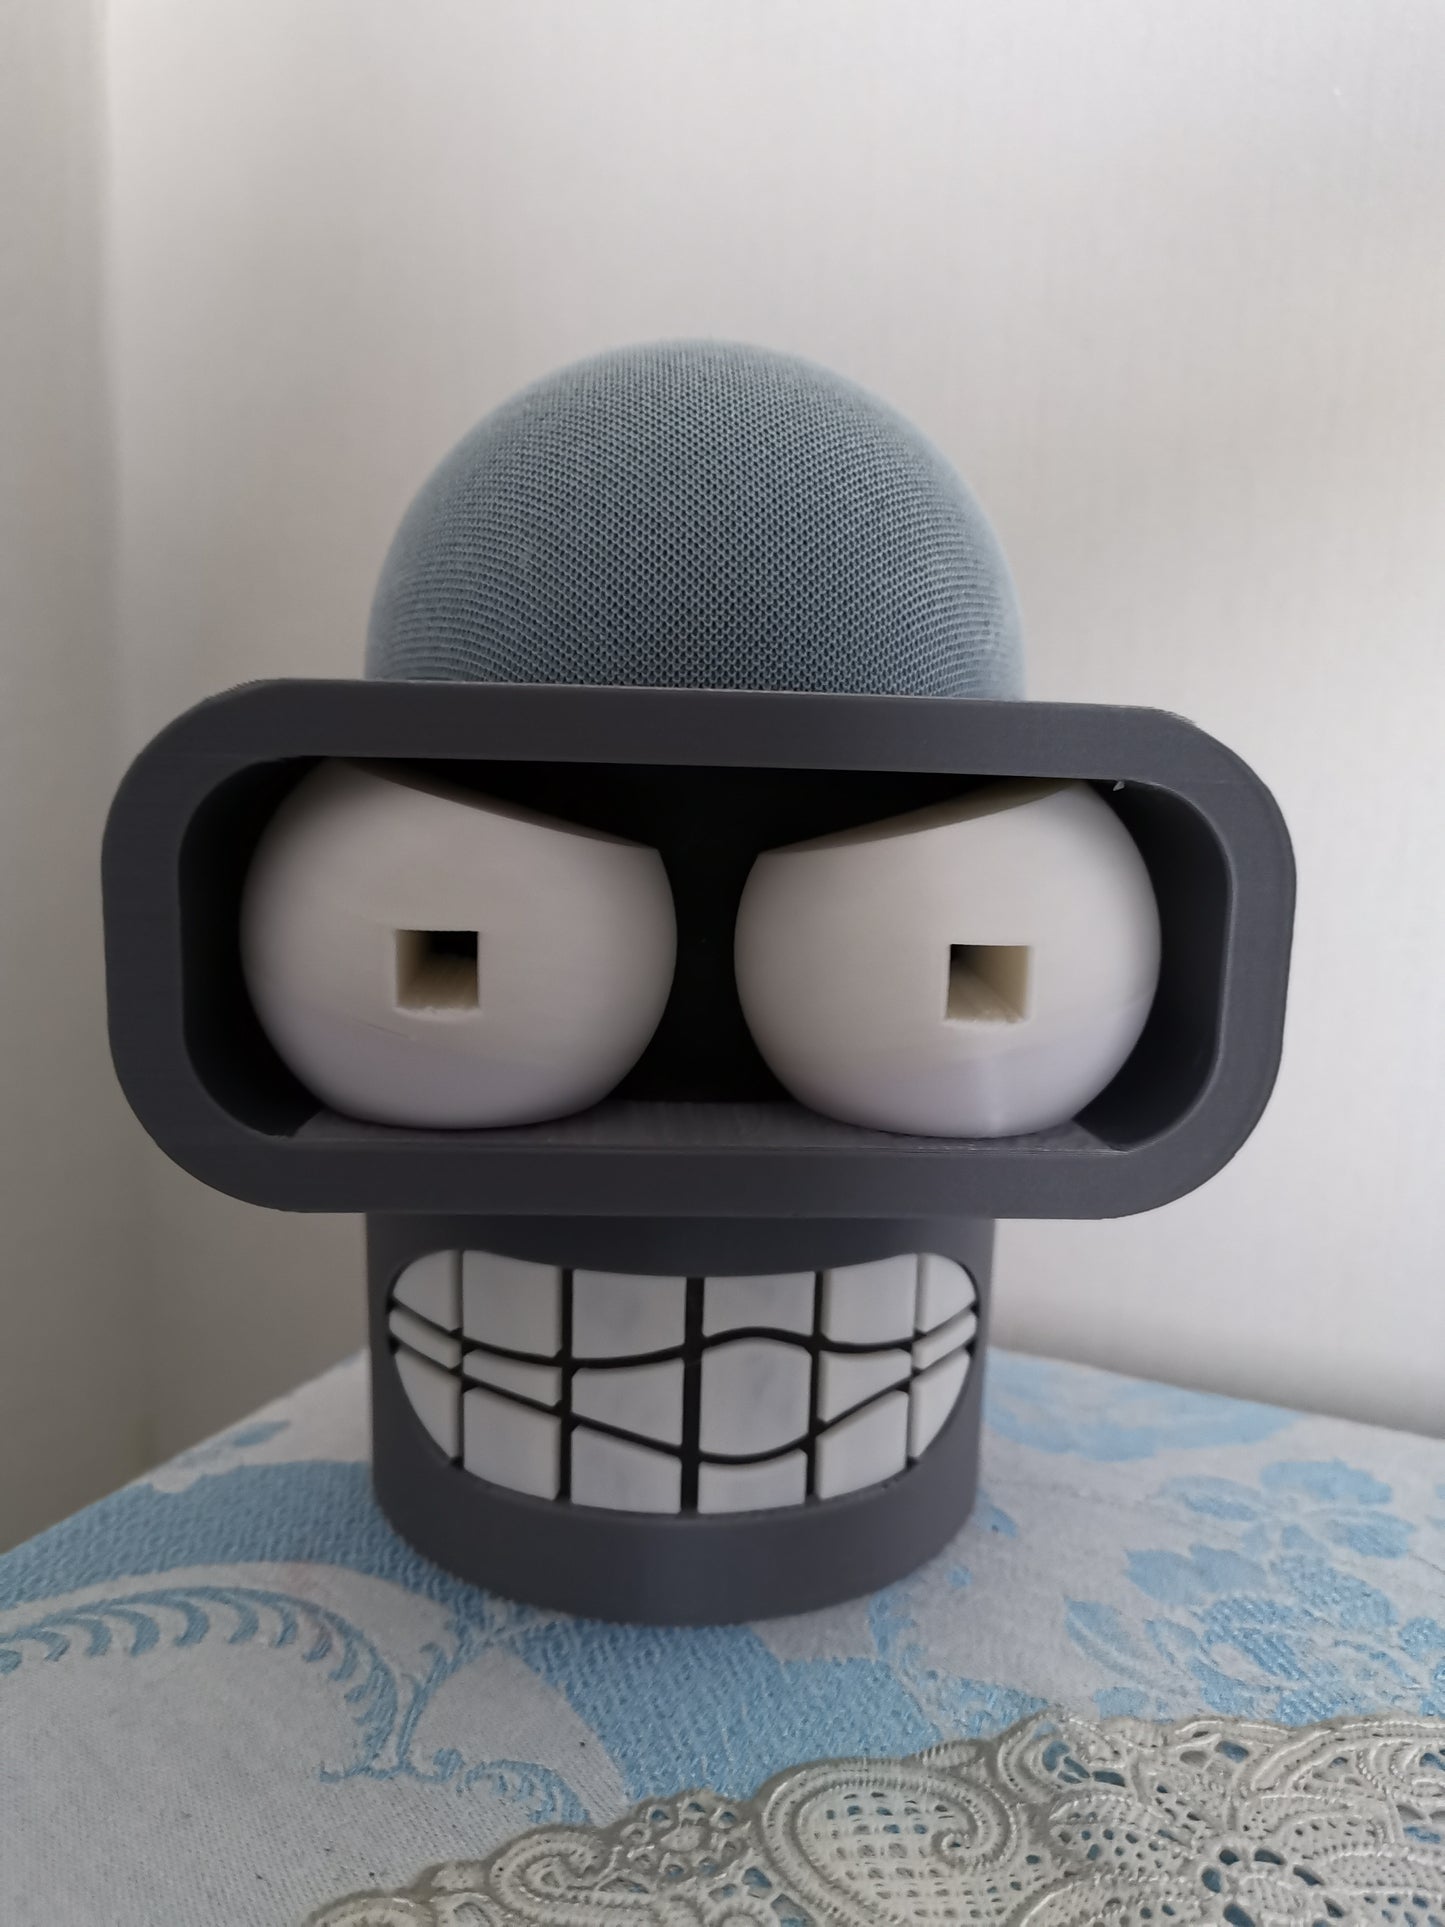 Bender Alexa Echo holder from the top in traditional colours